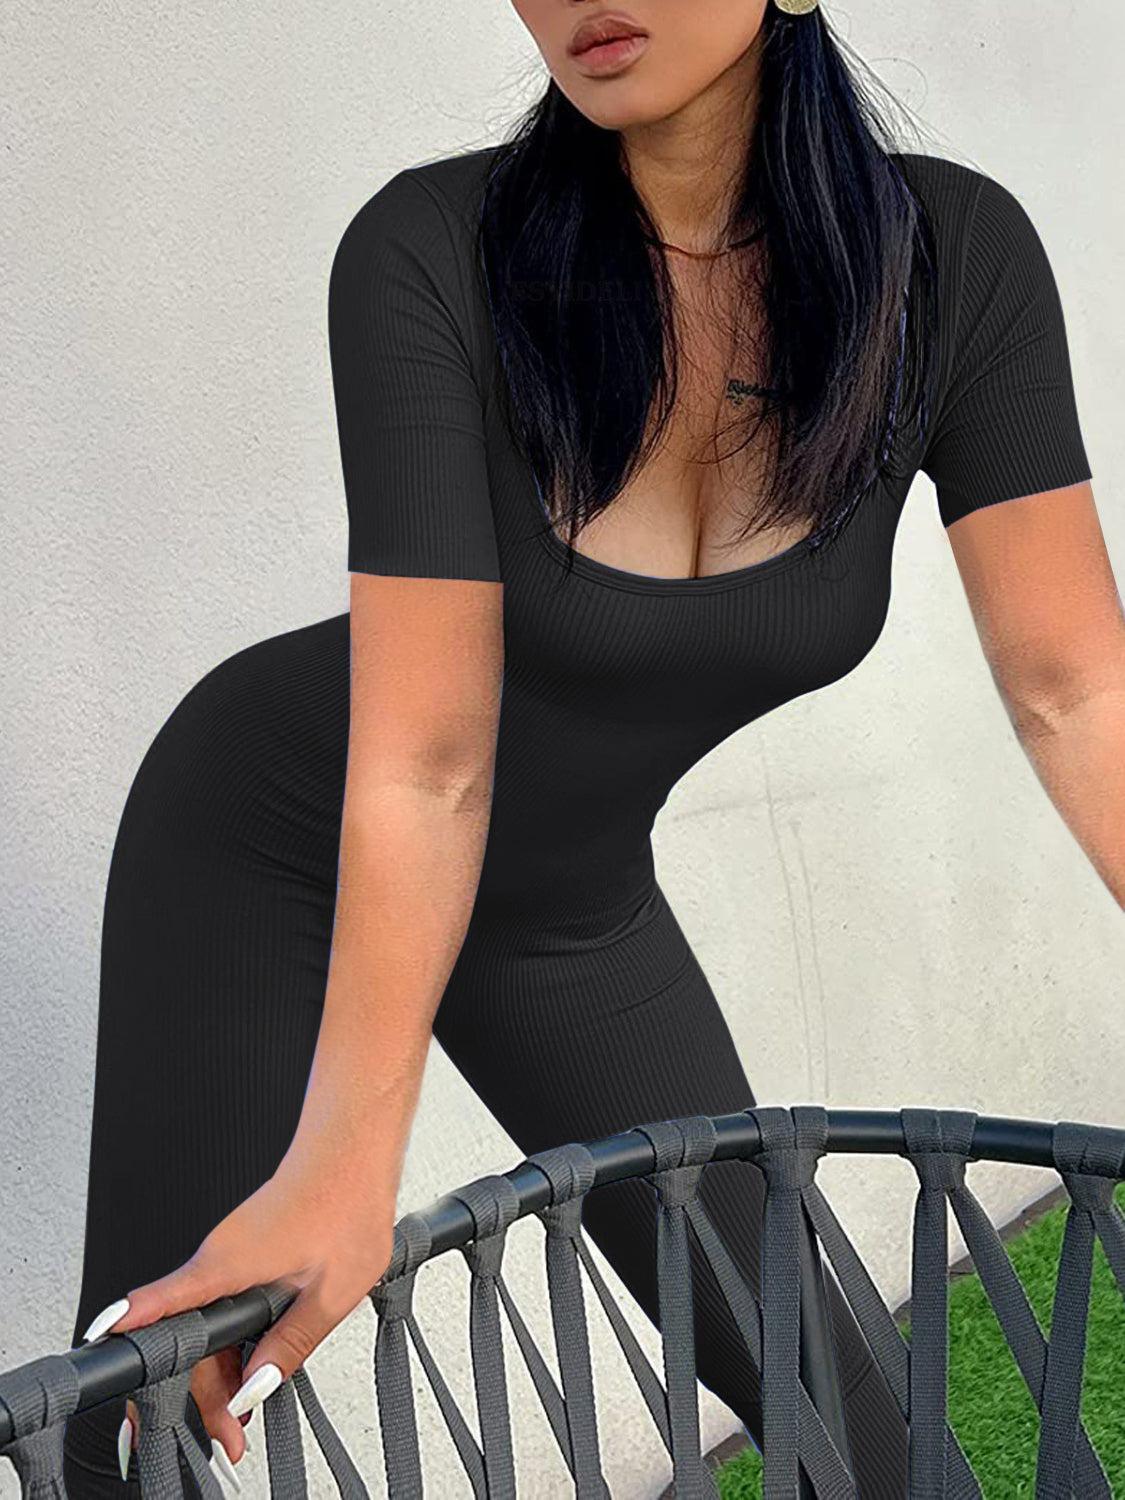 a woman in a black bodysuit leaning on a railing